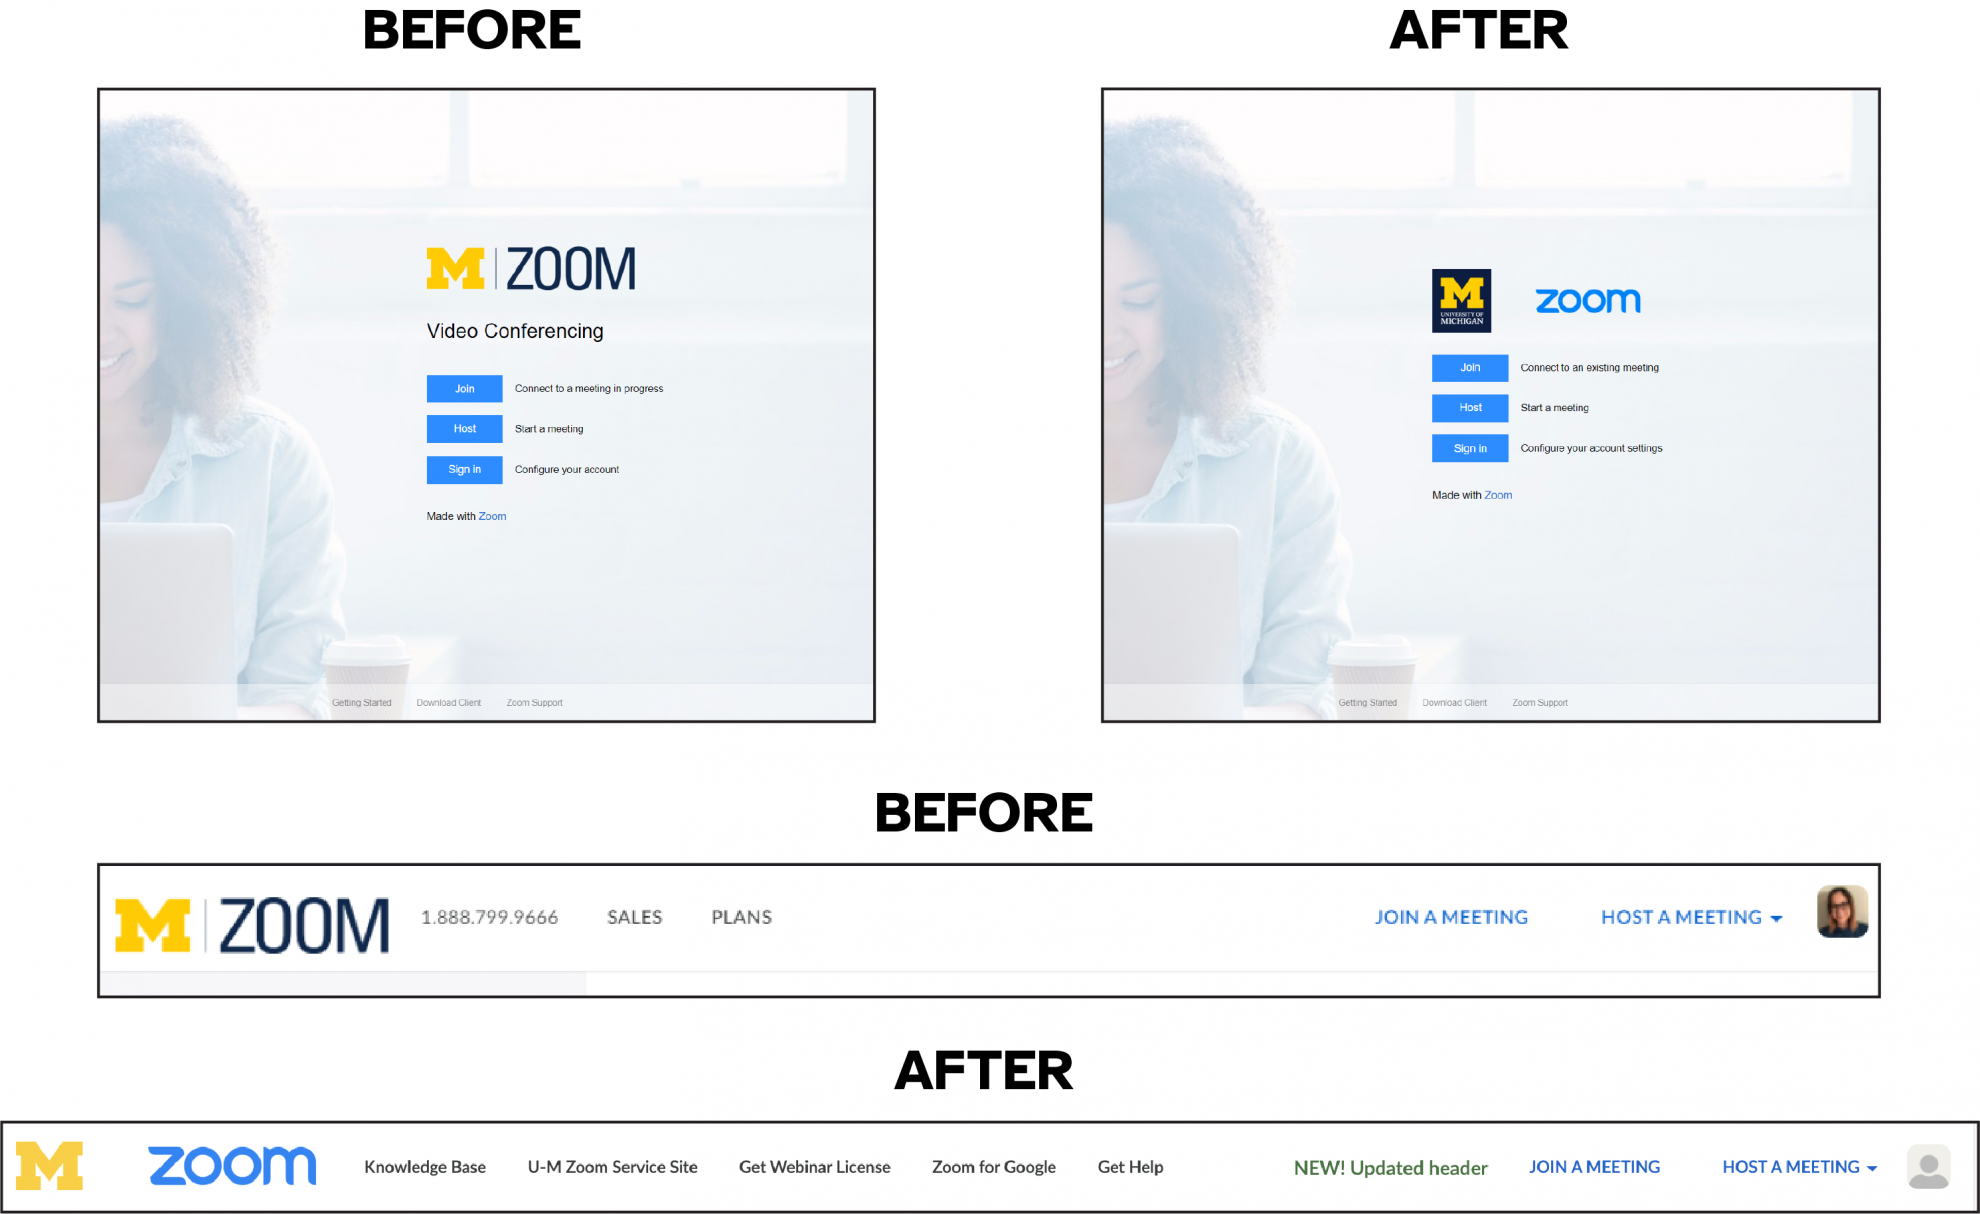 Simple before-and-after graphic, white background, top left shows before changes to U-M Zoom landing page, top right shows after. Bottom half has before and after pictures of U-M Zoom header